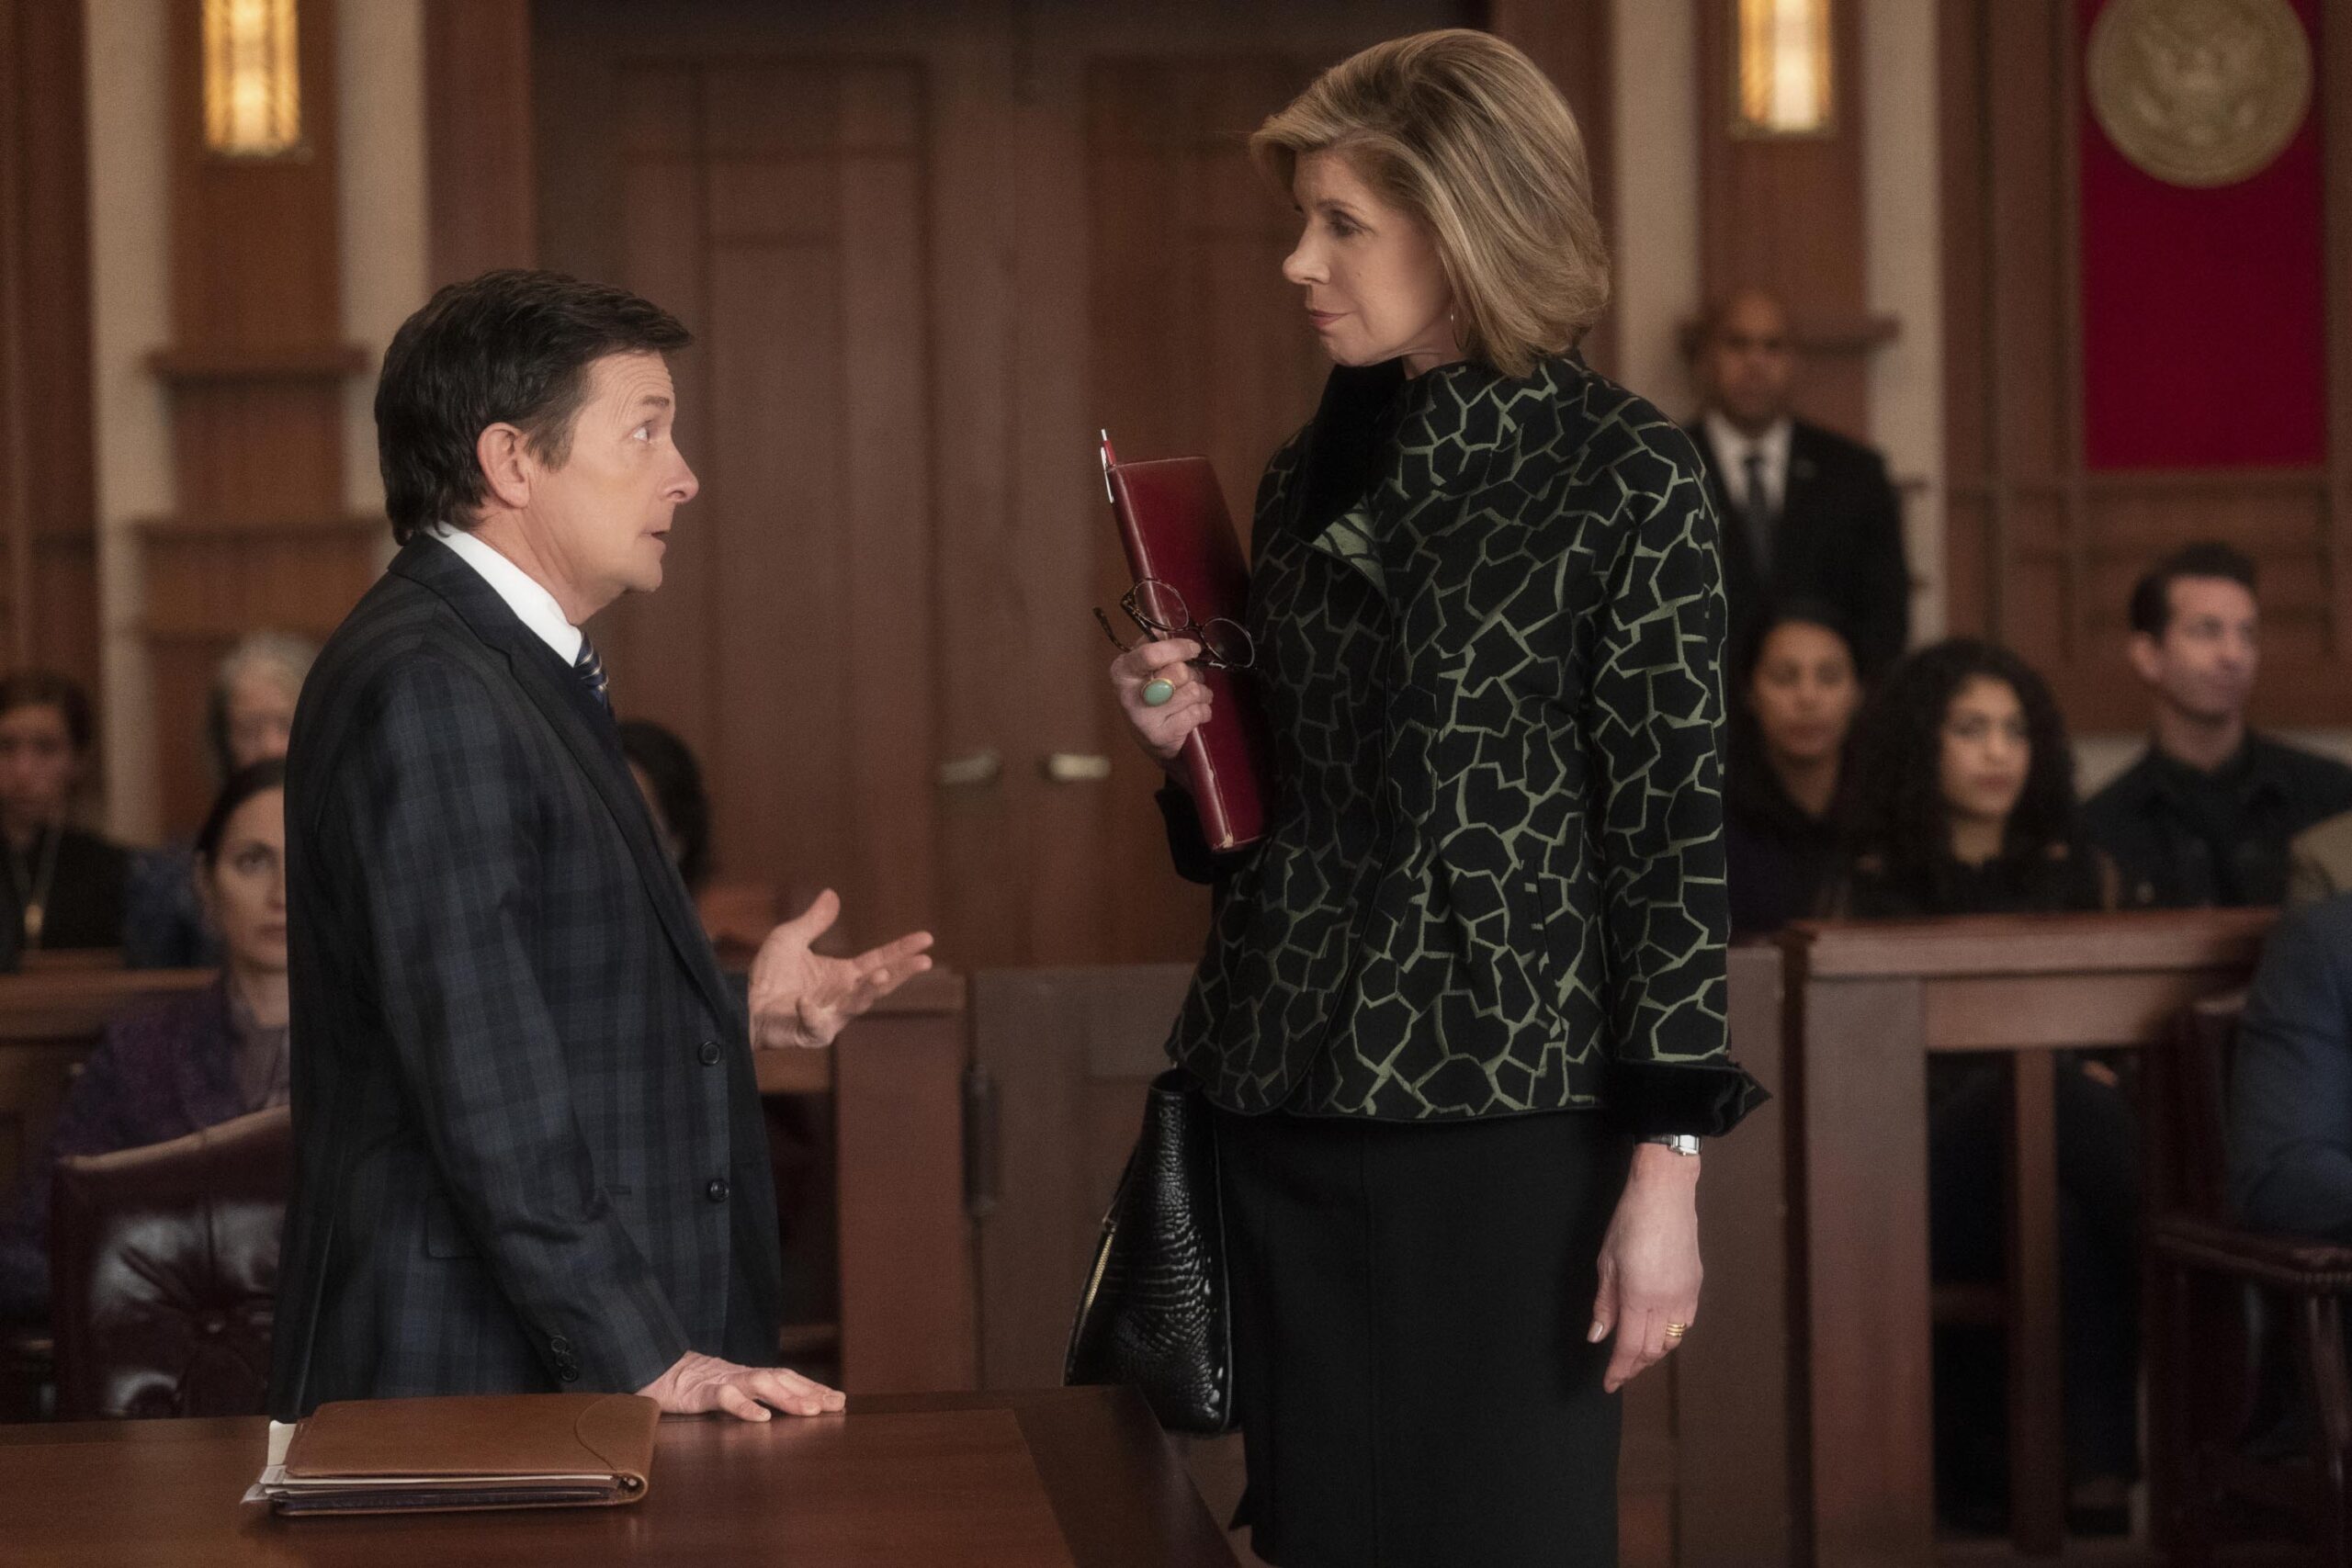 The Good Fight 4 - (da sinistra verso destra): Michael J. Fox come Louis Canning, Christine Baranski come Diane Lockhart [credit: Patrick Harbron/CBS; Copyright 2018 CBS Interactive, Inc. All Rights Reserved; courtesy of TIMvision]